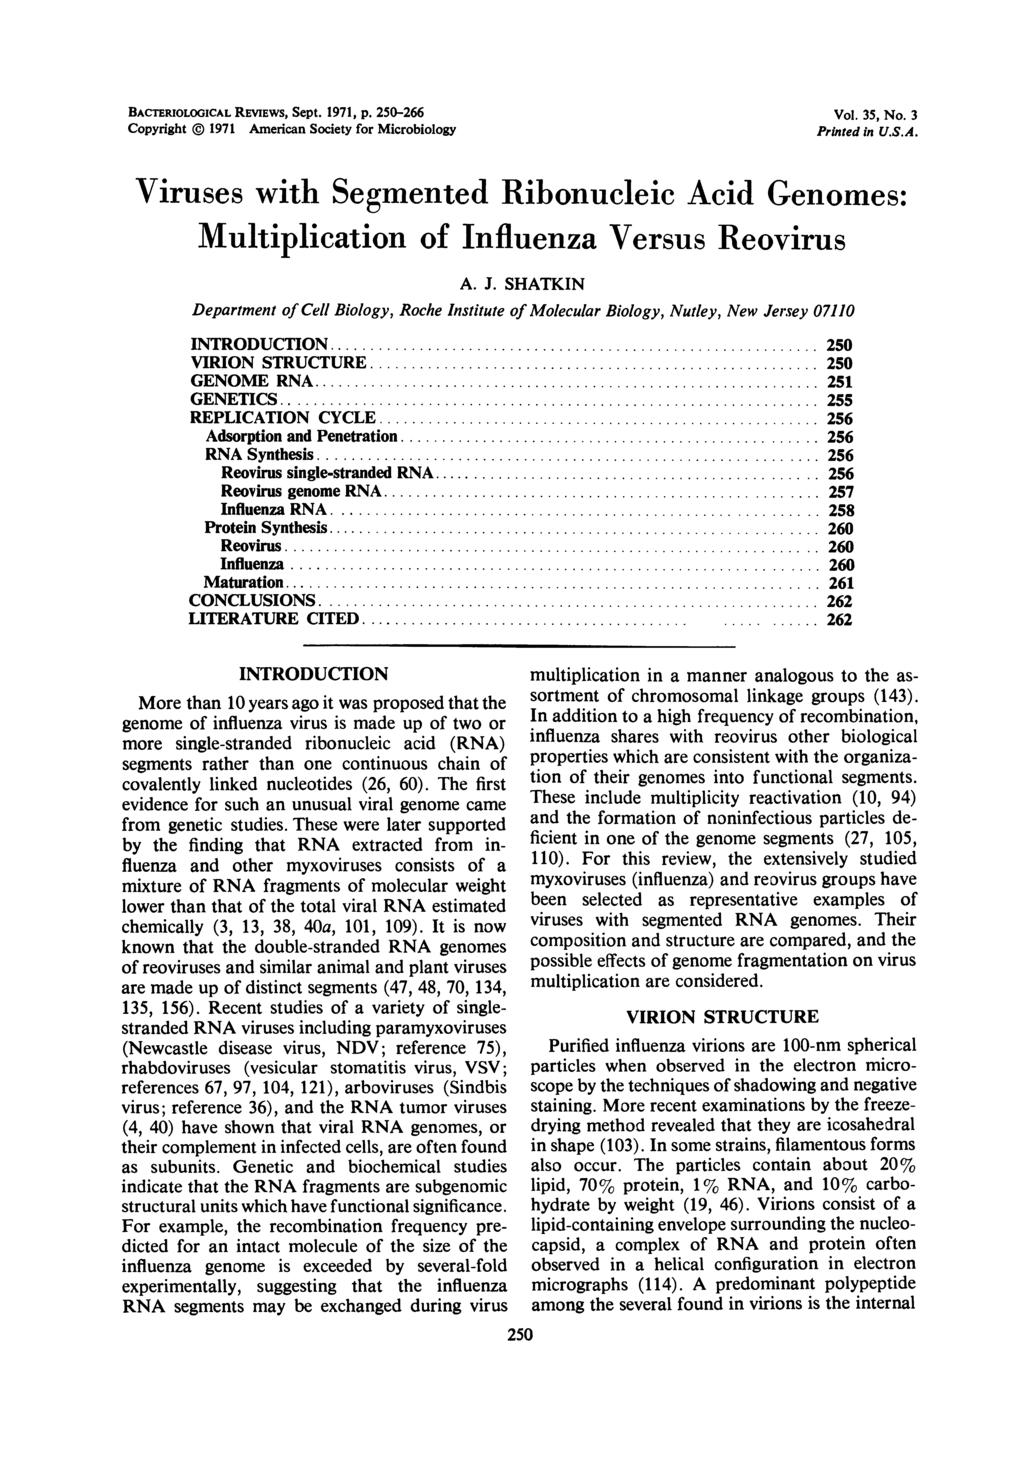 BACTERIOLOGICAL REVIEWS, Sept. 1971, p. 250-266 Copyright 1971 American Society for Microbiology Vol. 35, No. 3 Printed in U.S.A. Viruses with Segmented Ribonucleic Acid Genomes: Multiplication of Influenza Versus Reovirus A.